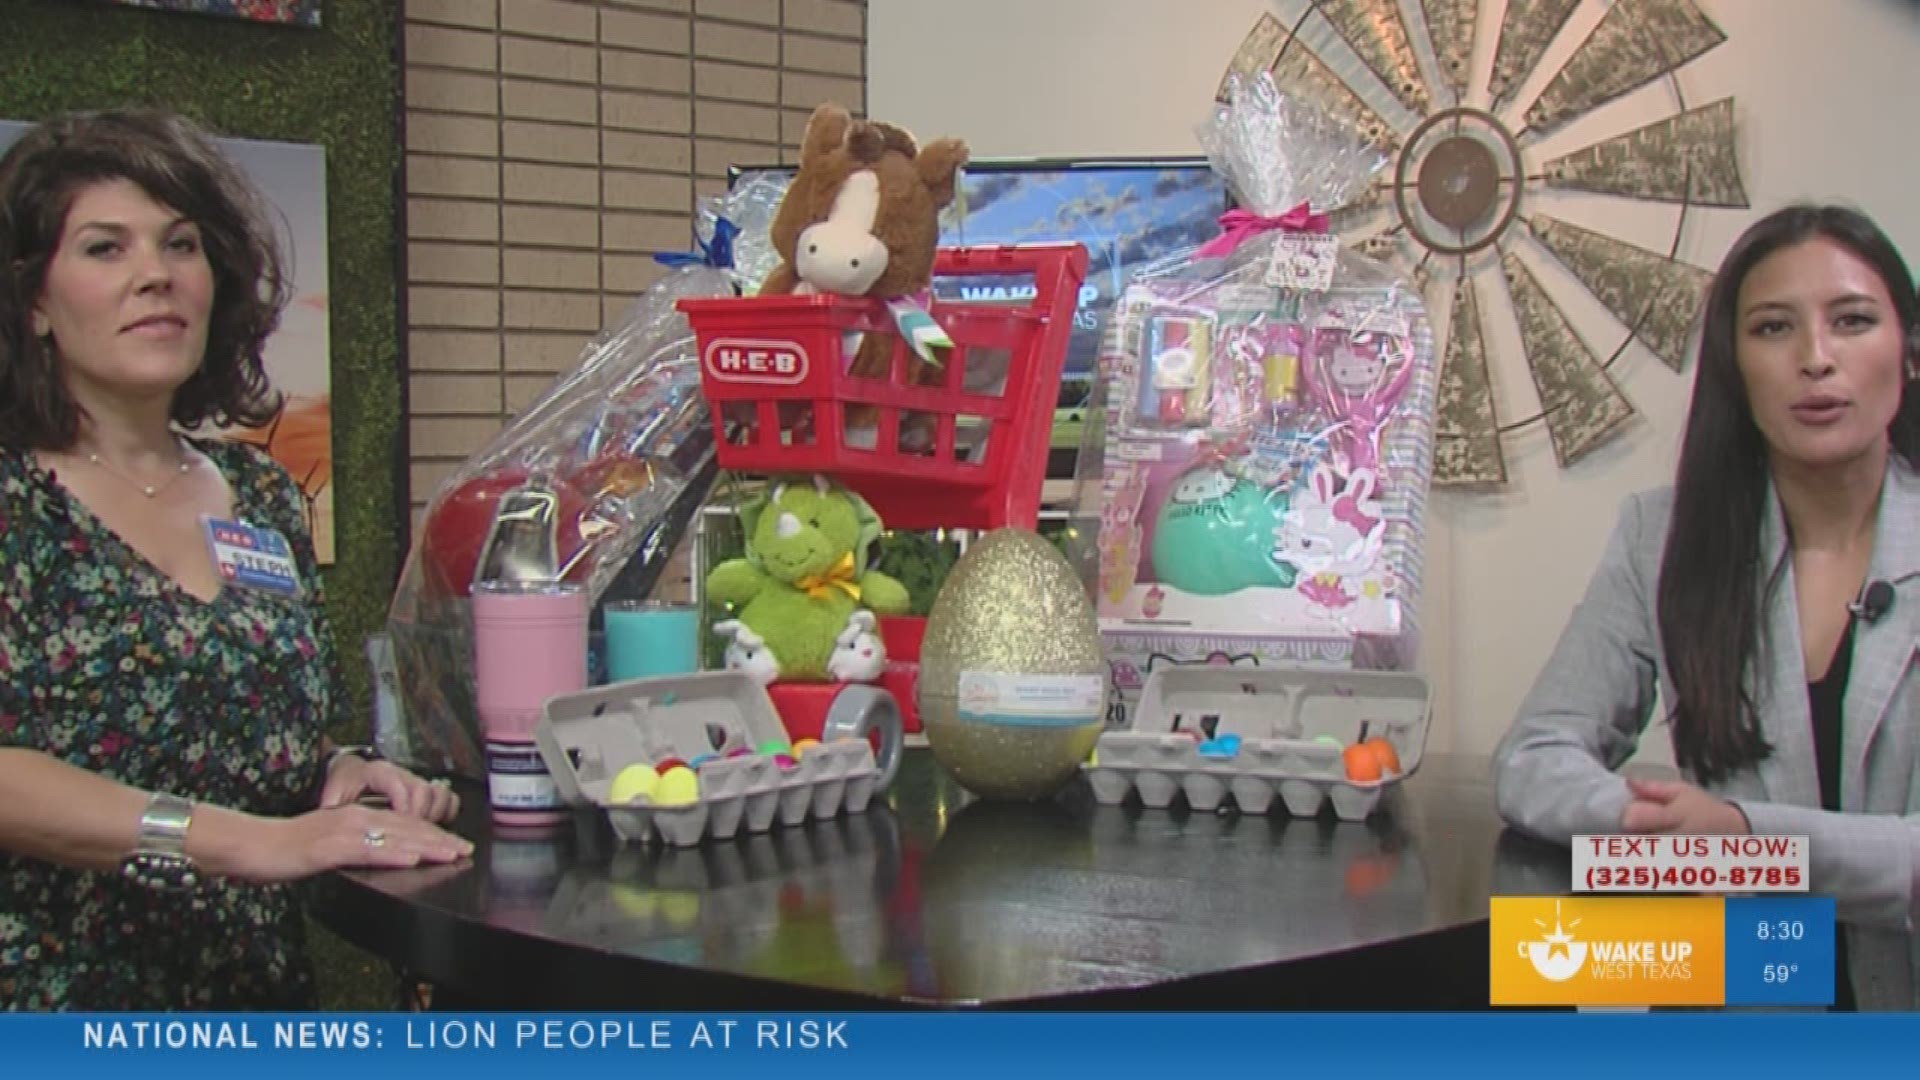 Our Camille Requiestas spoke with HEB for last minute tips on creating your own Easter baskets.